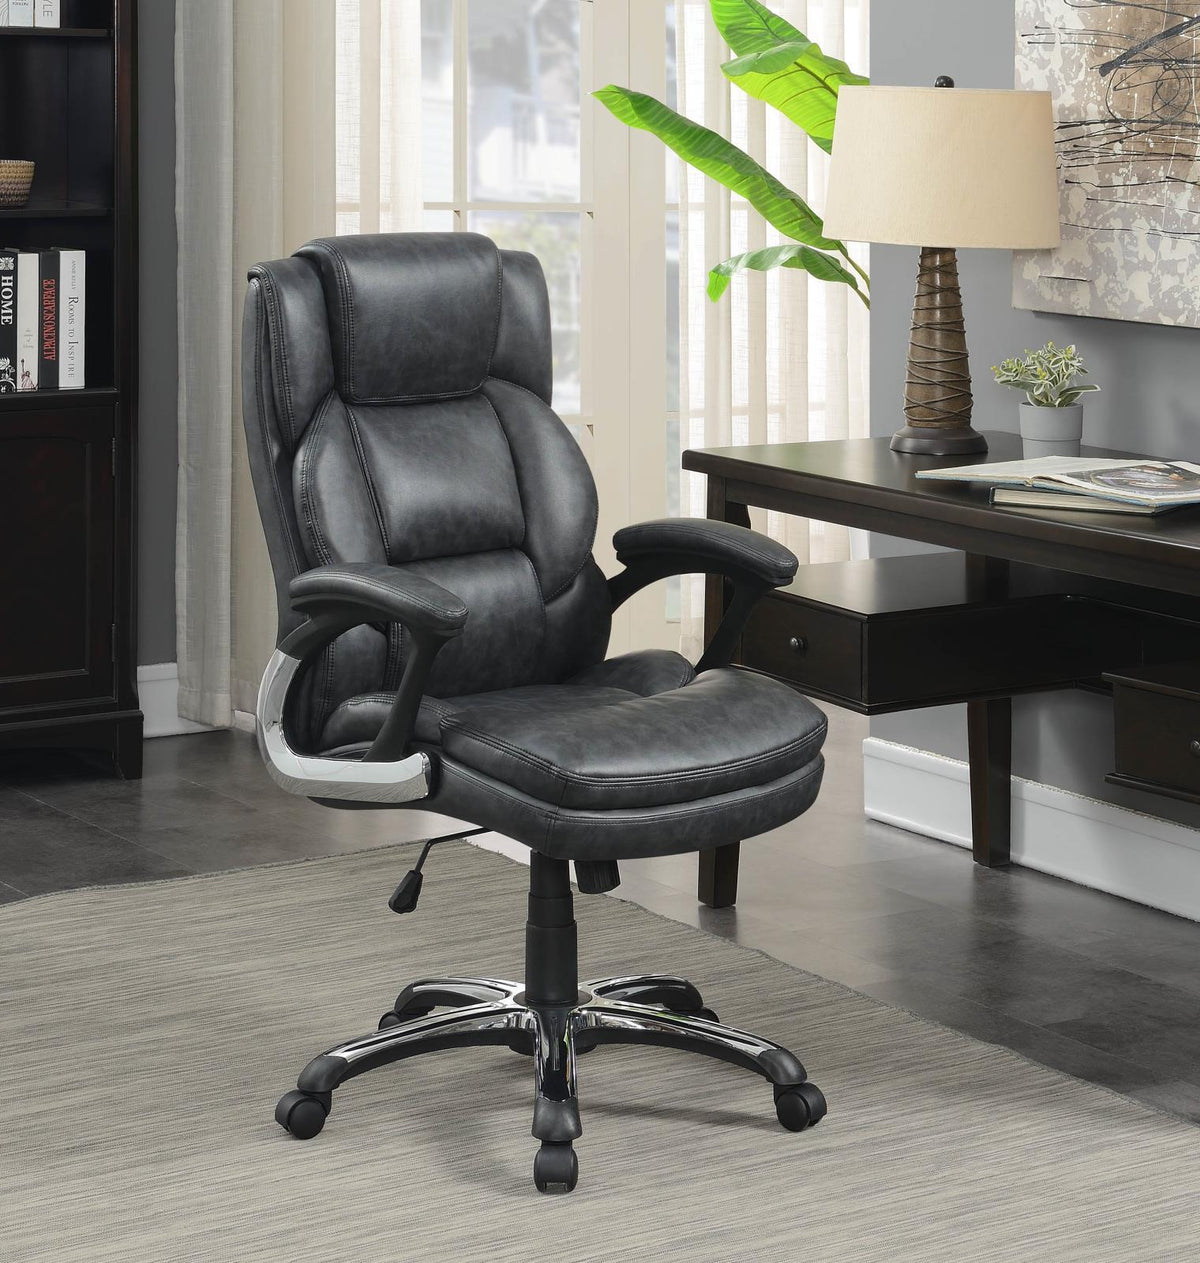 Nerris Adjustable Height Office Chair with Padded Arm Grey and Black - Half Price Furniture